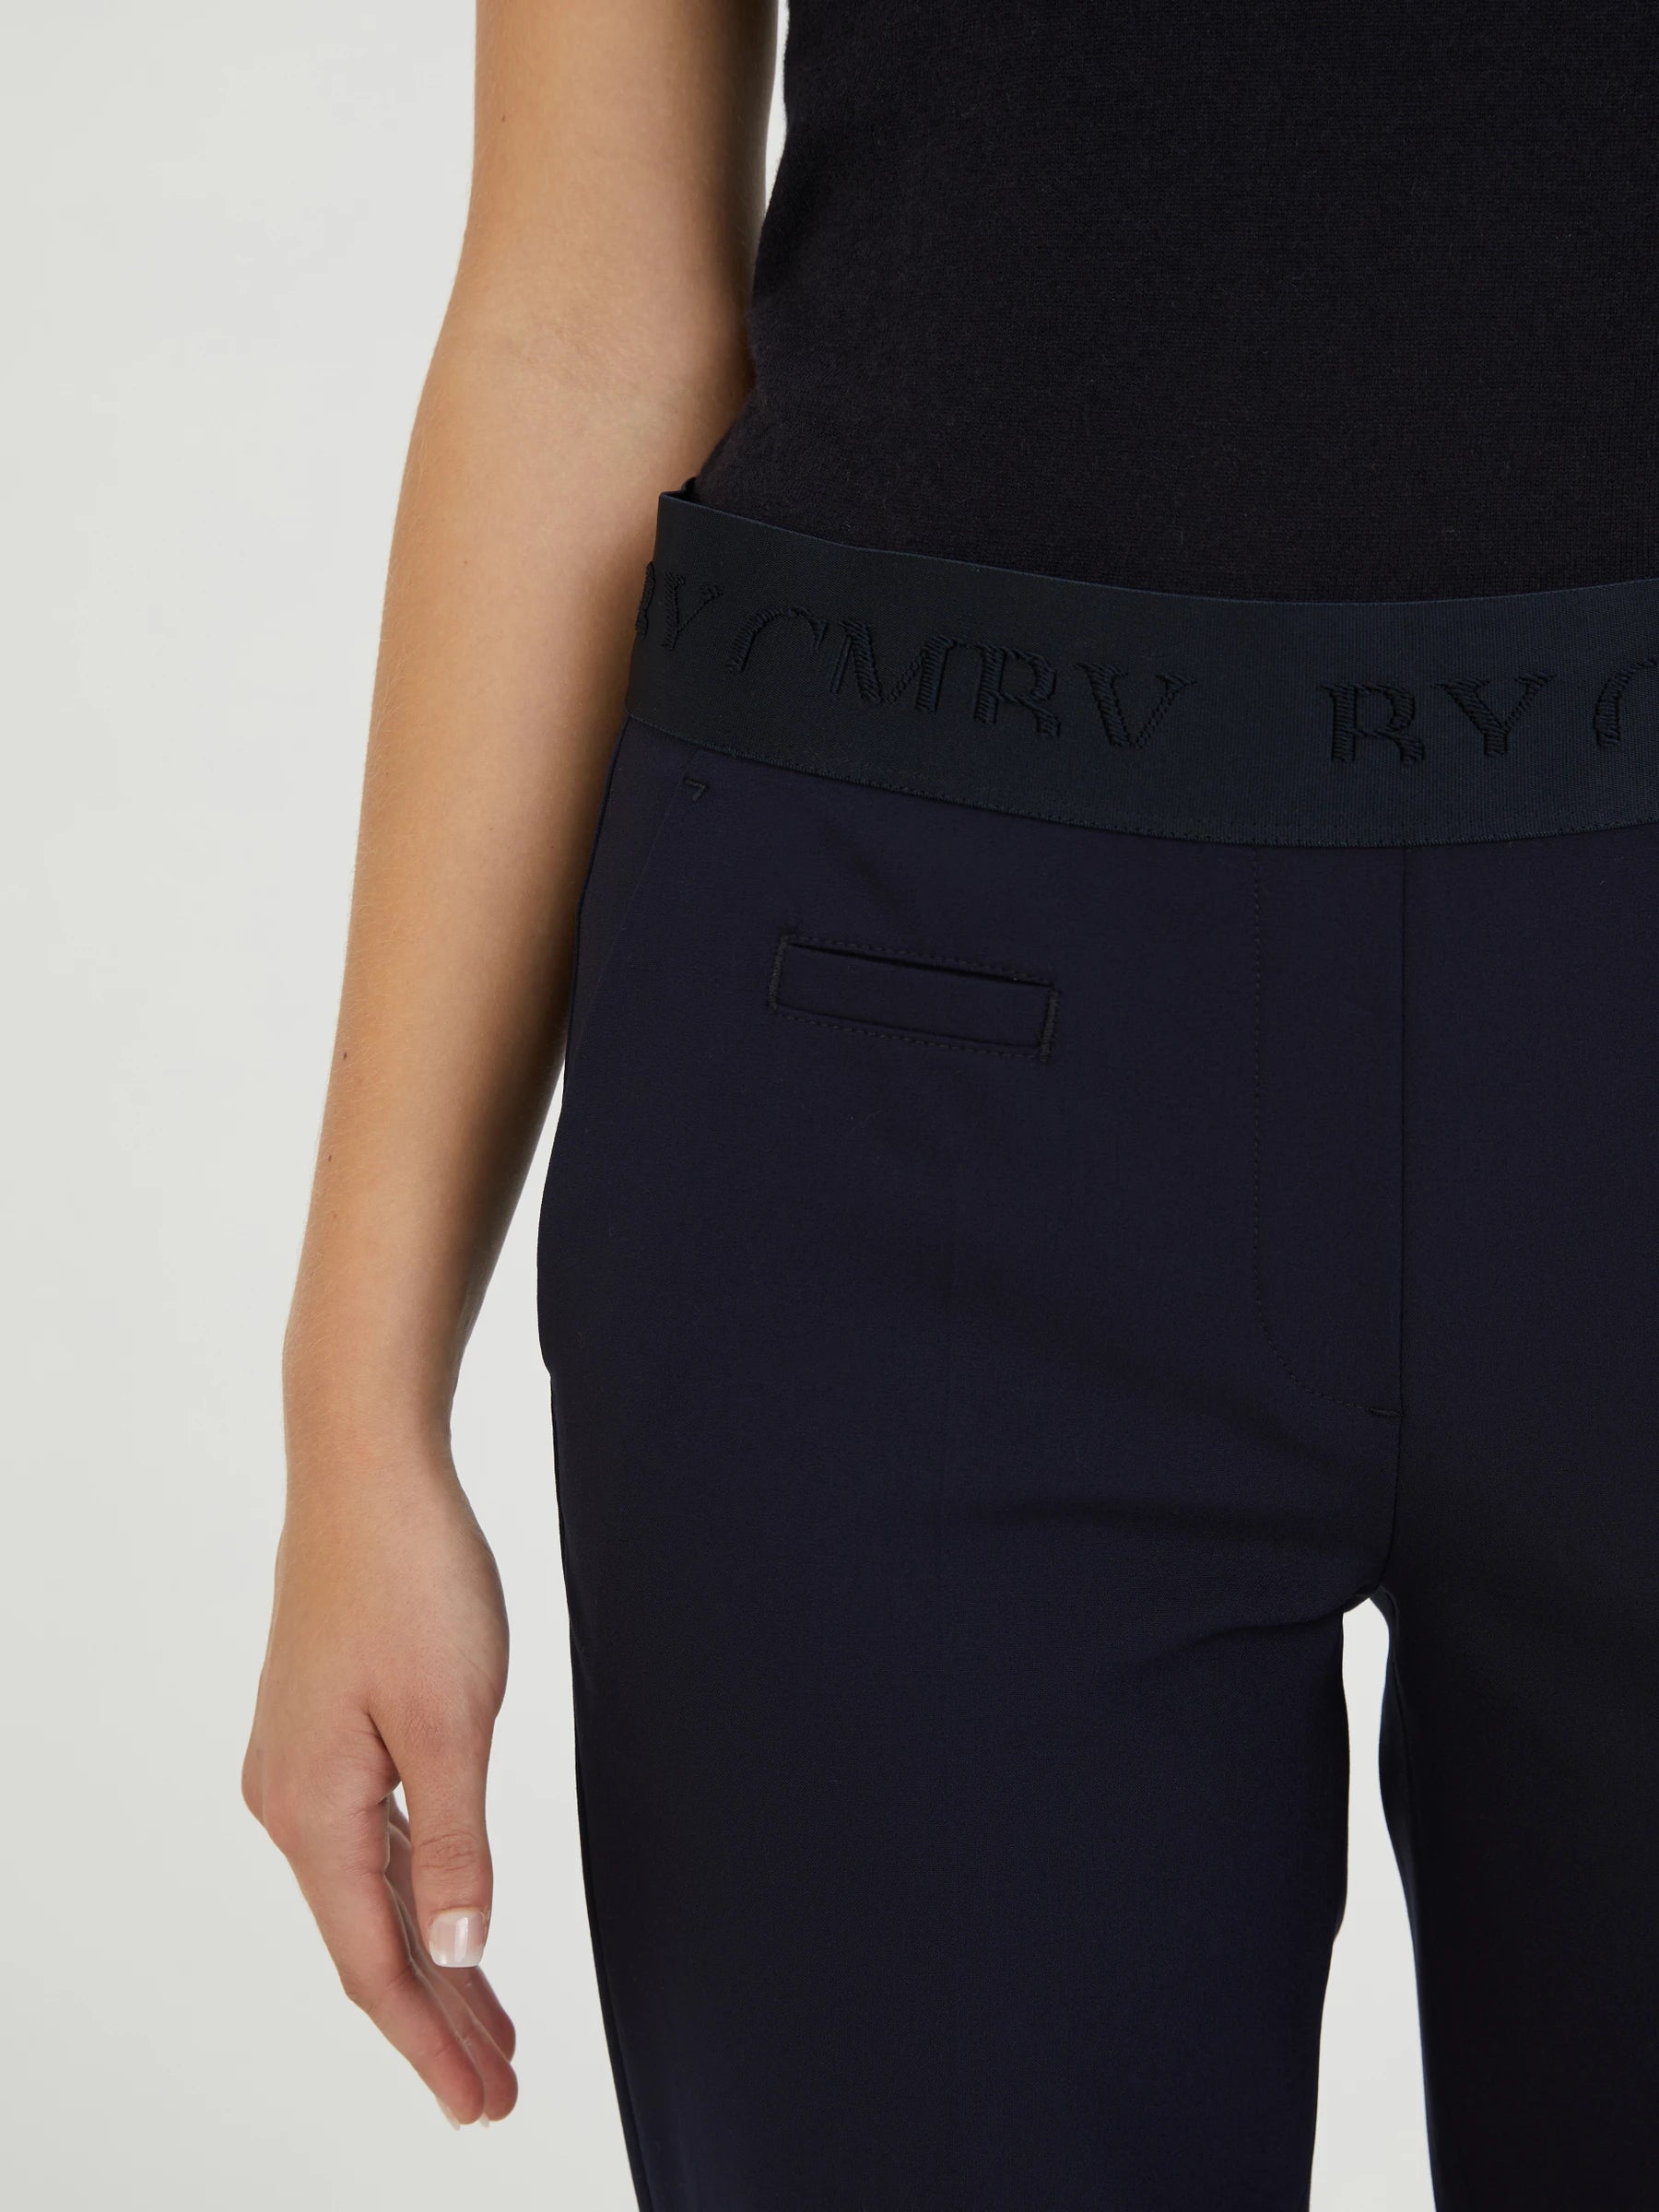 Cambio pant in Navy Kim